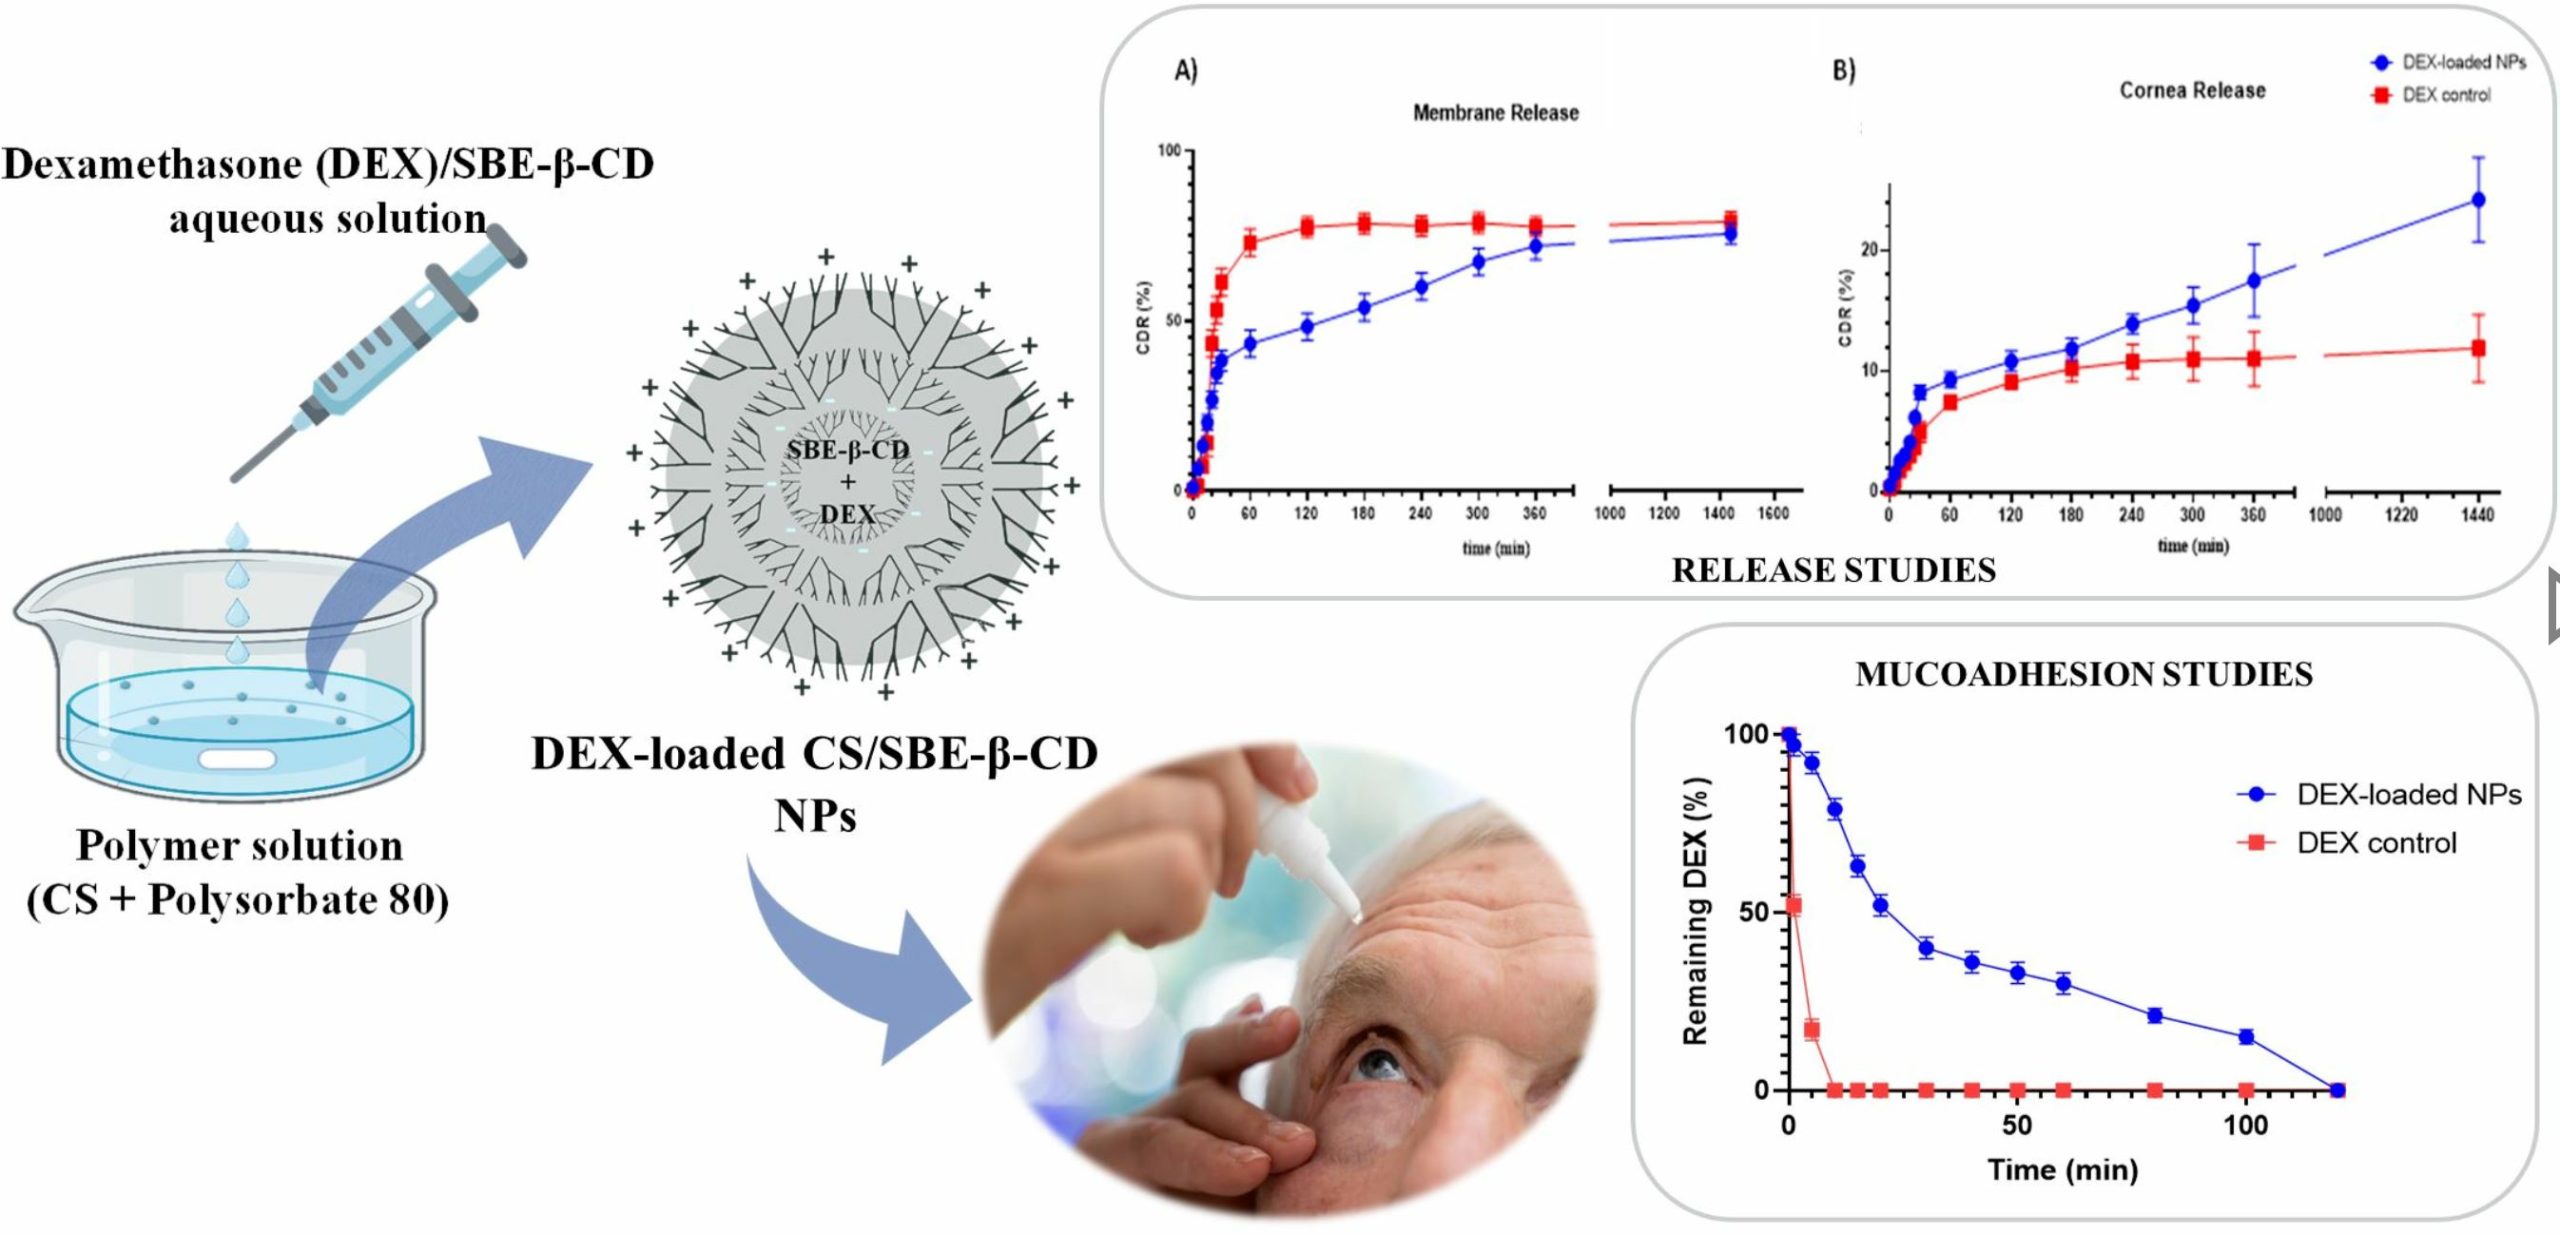 Chitosan and Anionic Solubility Enhancer Sulfobutylether-β-Cyclodextrin-Based Nanoparticles as Dexamethasone Ophthalmic Delivery System for Anti-Inflammatory Therapy